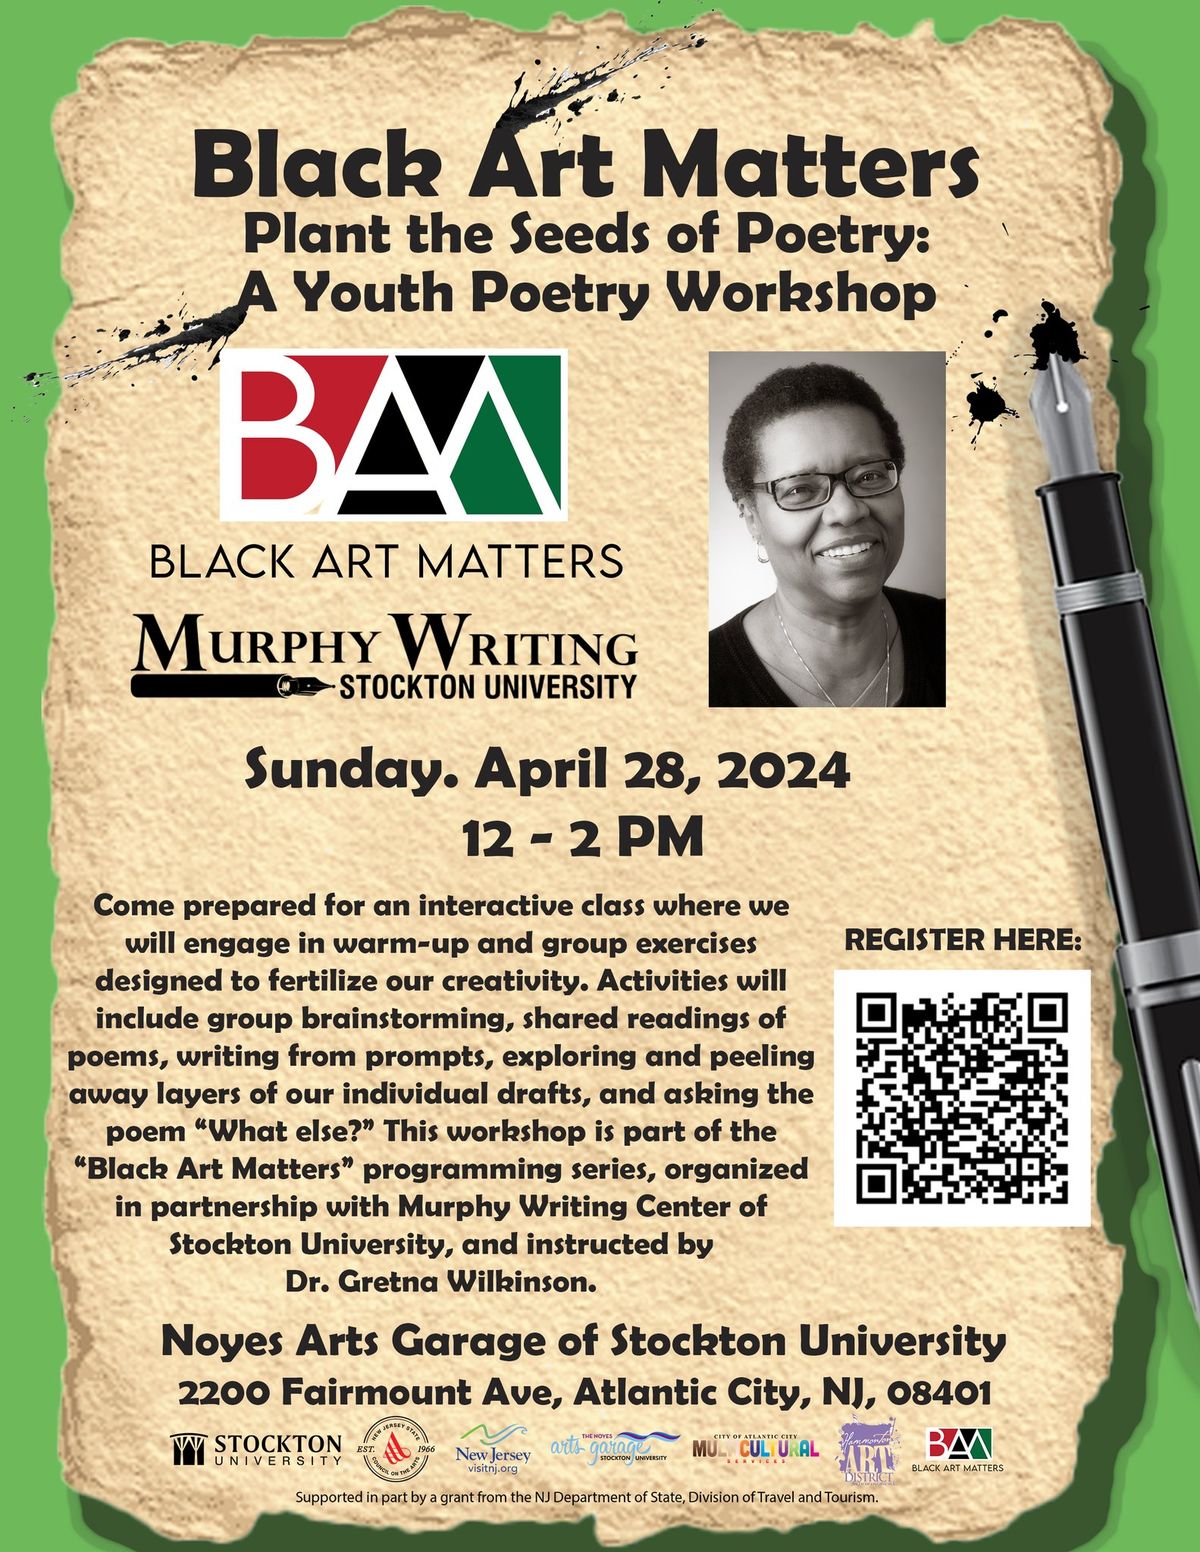 (Black Art Matters) Plant the Seeds of Poetry: A Youth Poetry Workshop